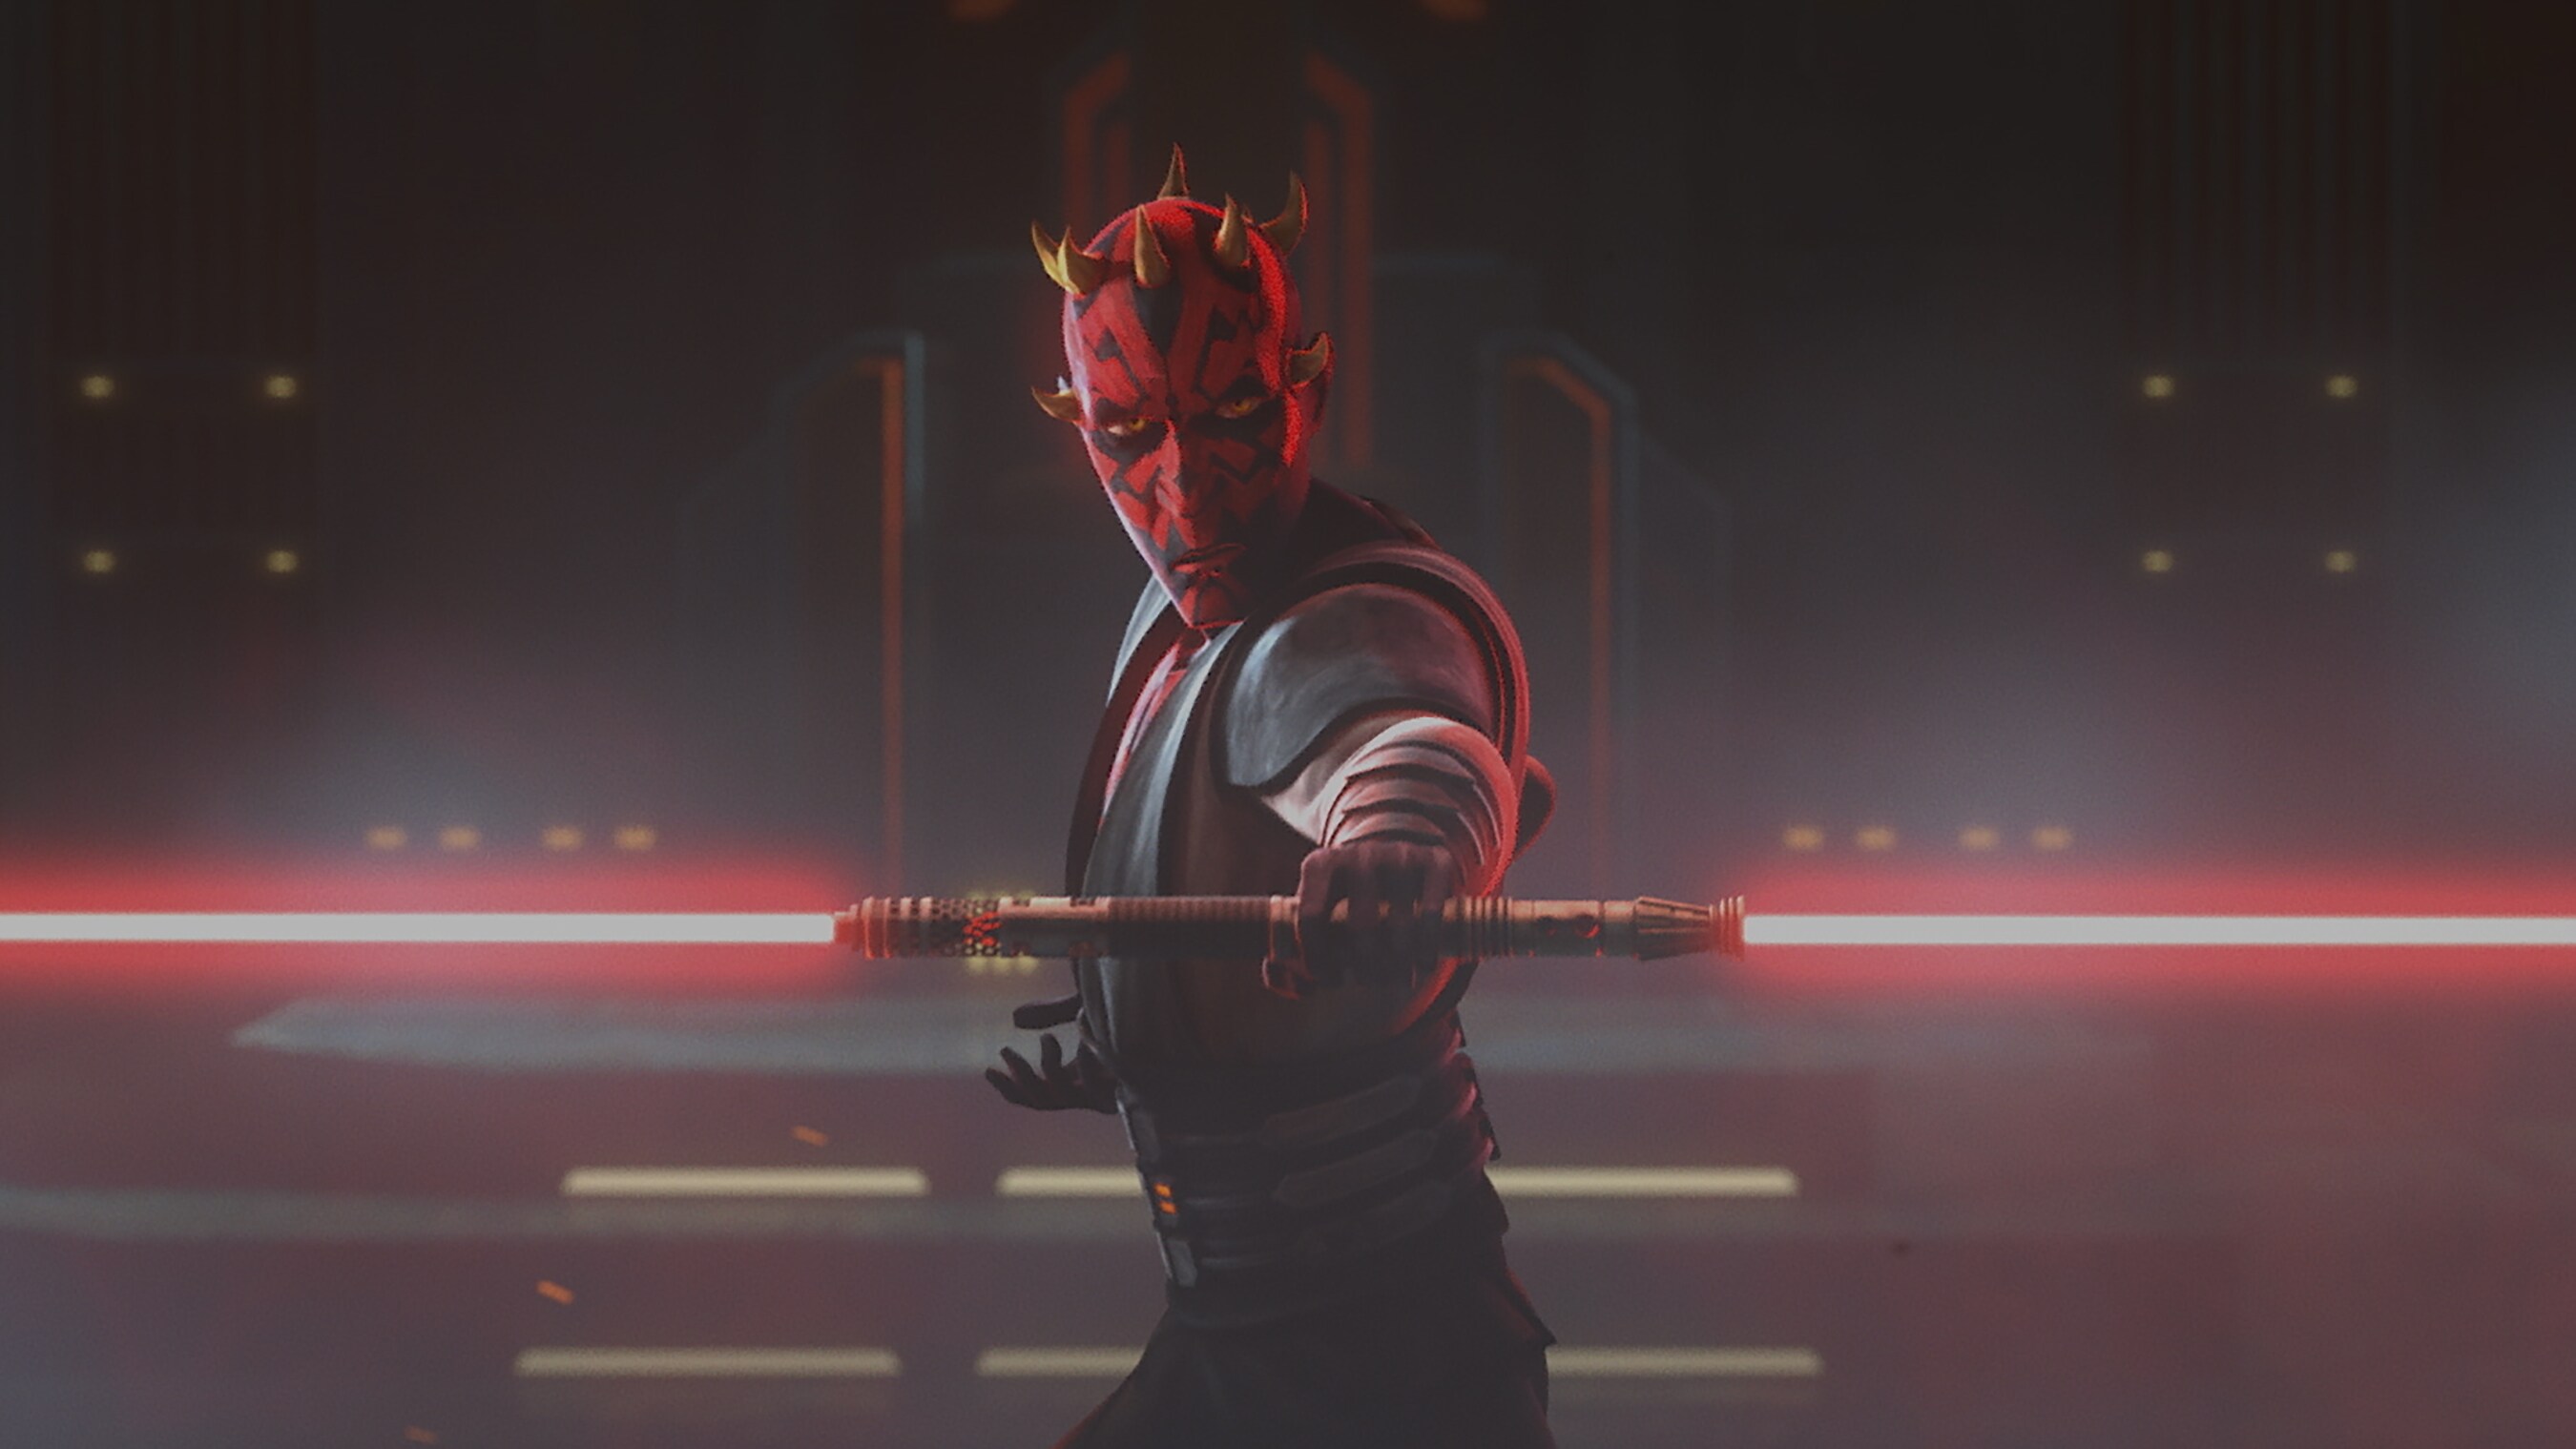 Maul in STAR WARS: THE CLONE WARS, exclusively on Disney+.